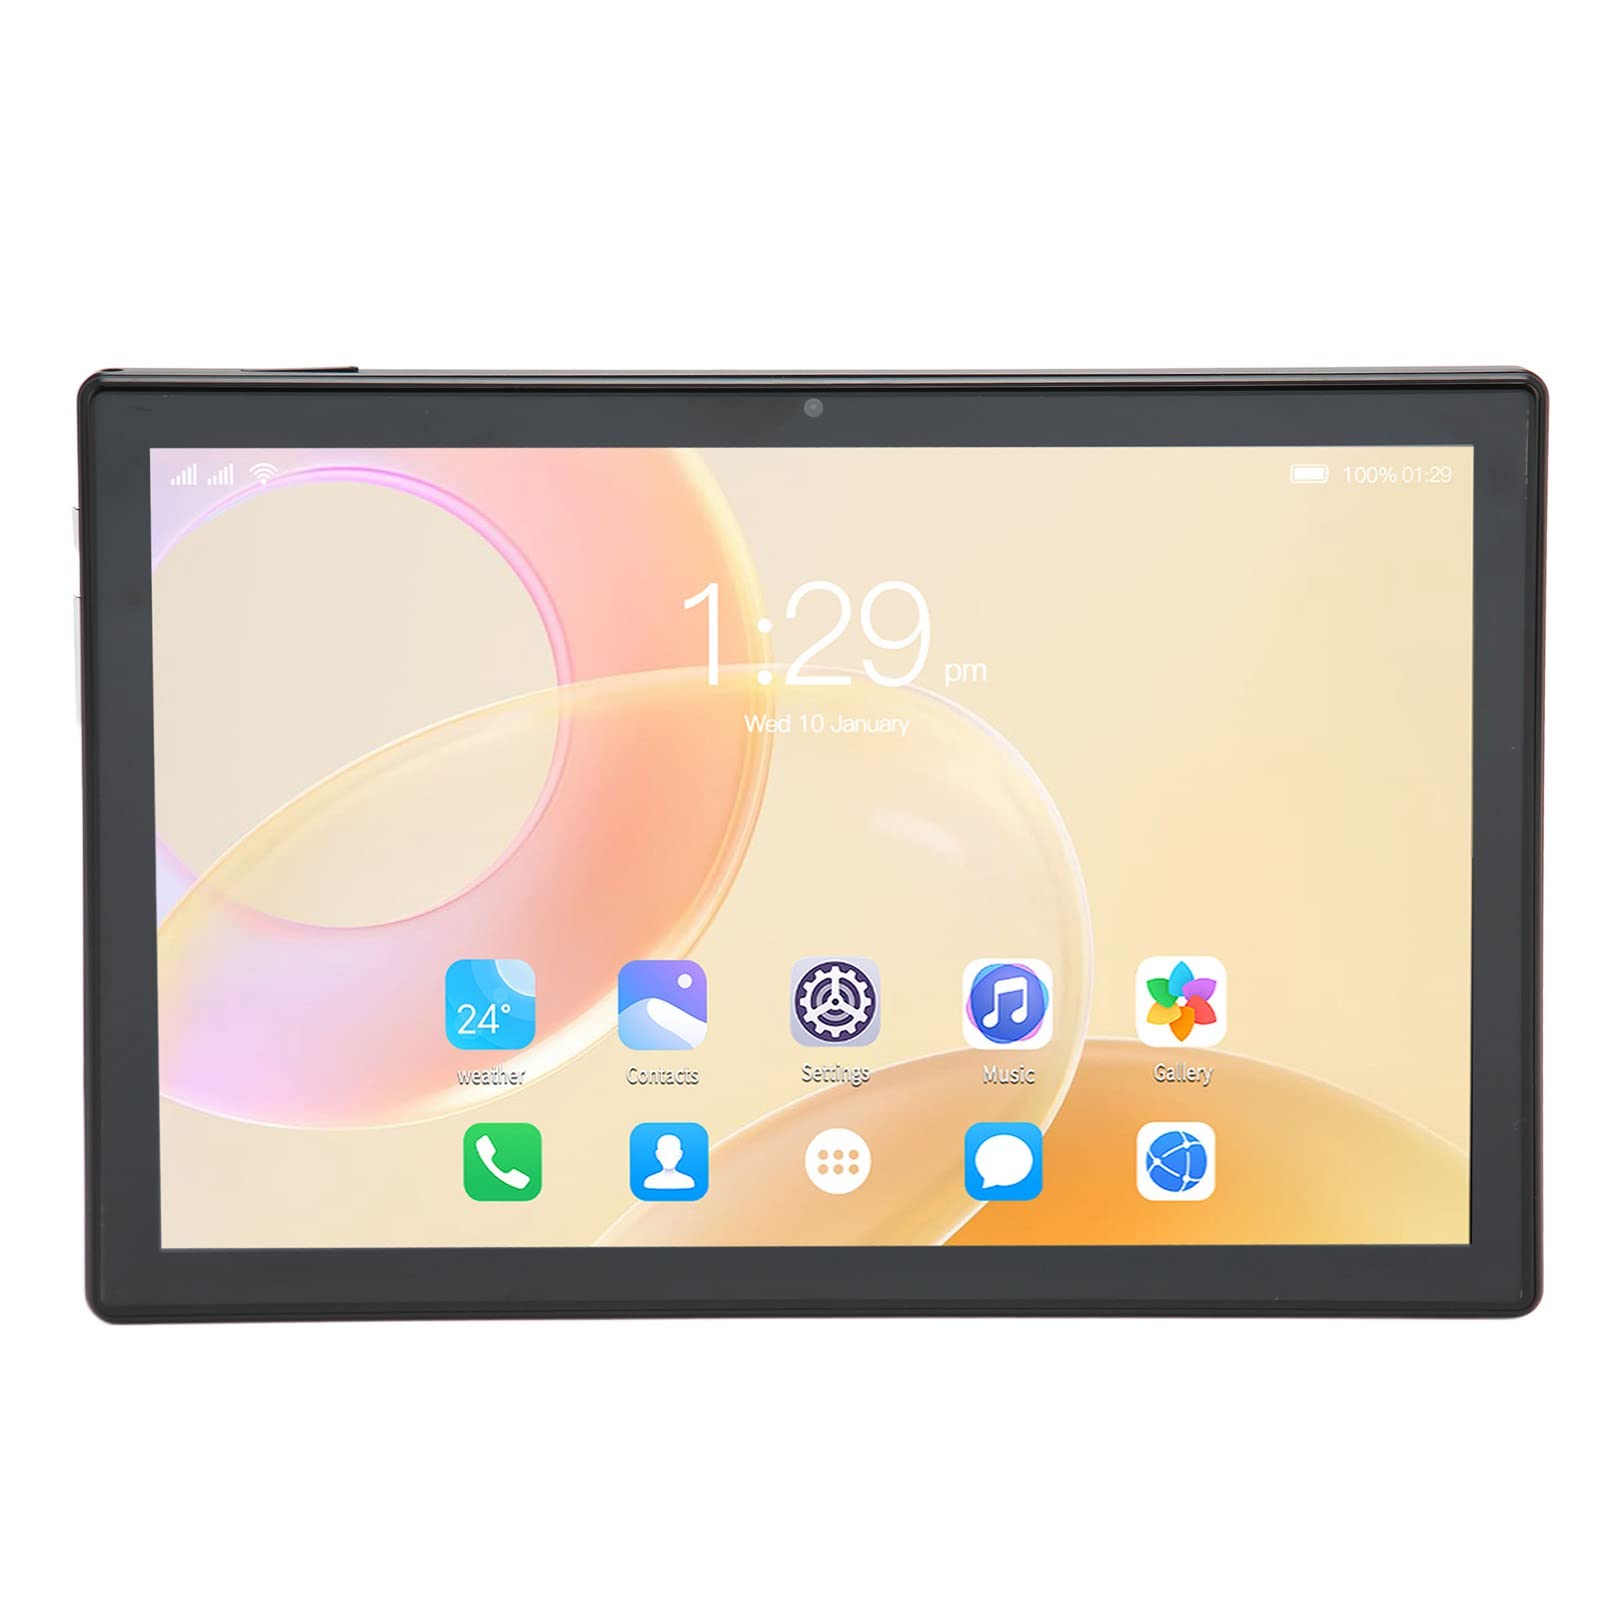 Estink 10 Inch Tablet, IPS LCD Screen, 1960x1080 Resolution, Octa Core CPU, 6GB RAM 256GB ROM, 13 Megapixel Camera, Dual SIM Dual Standby, Can Be Used for Home Study Office